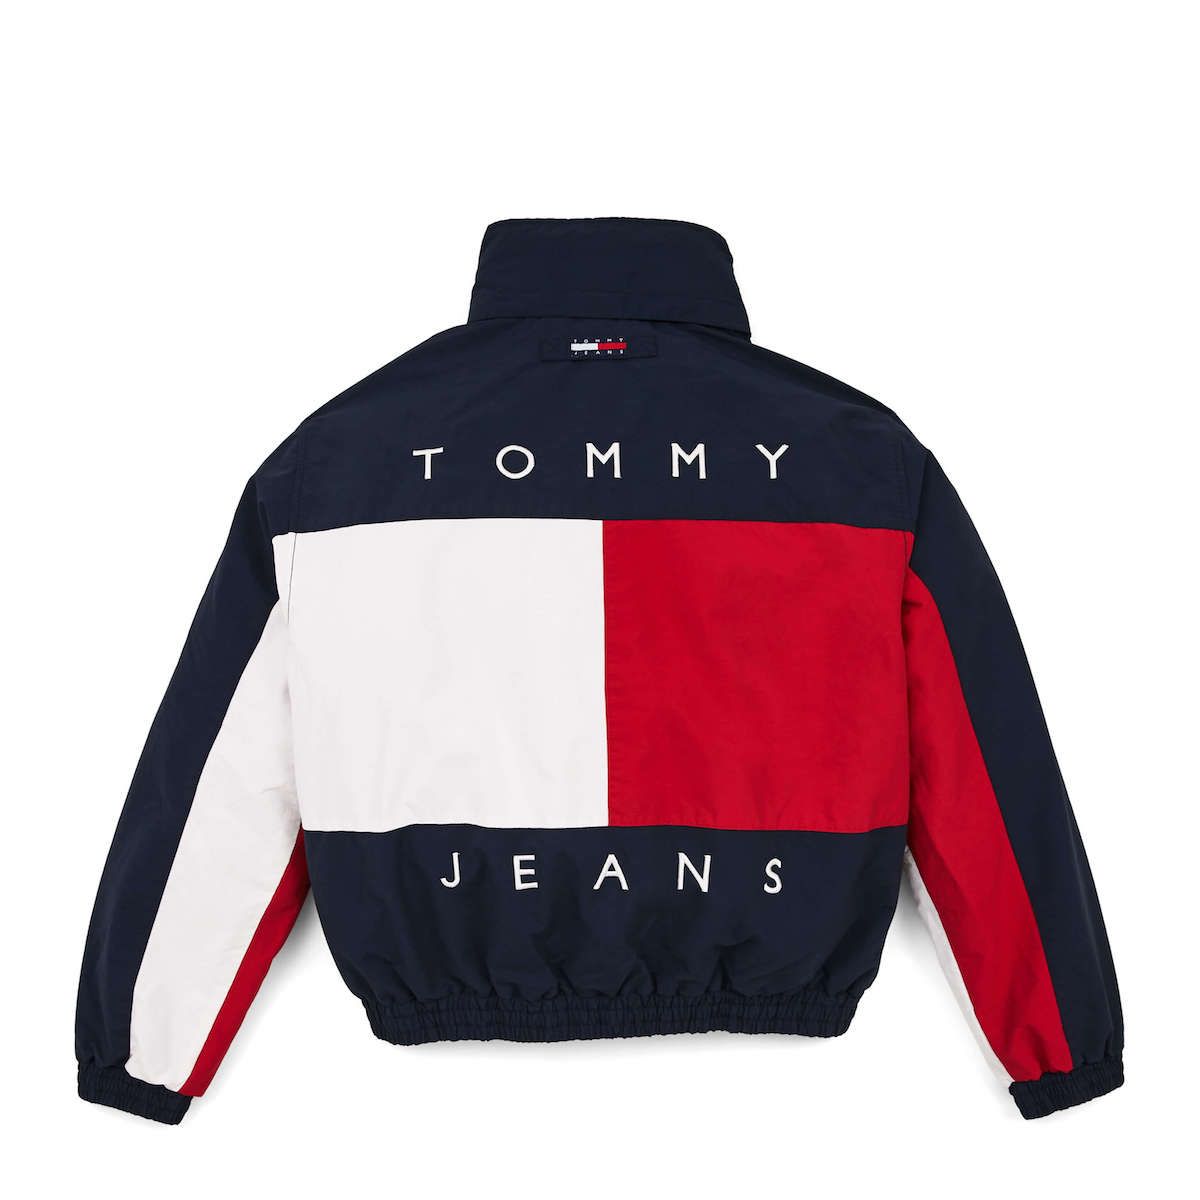 difference between tommy jeans and hilfiger